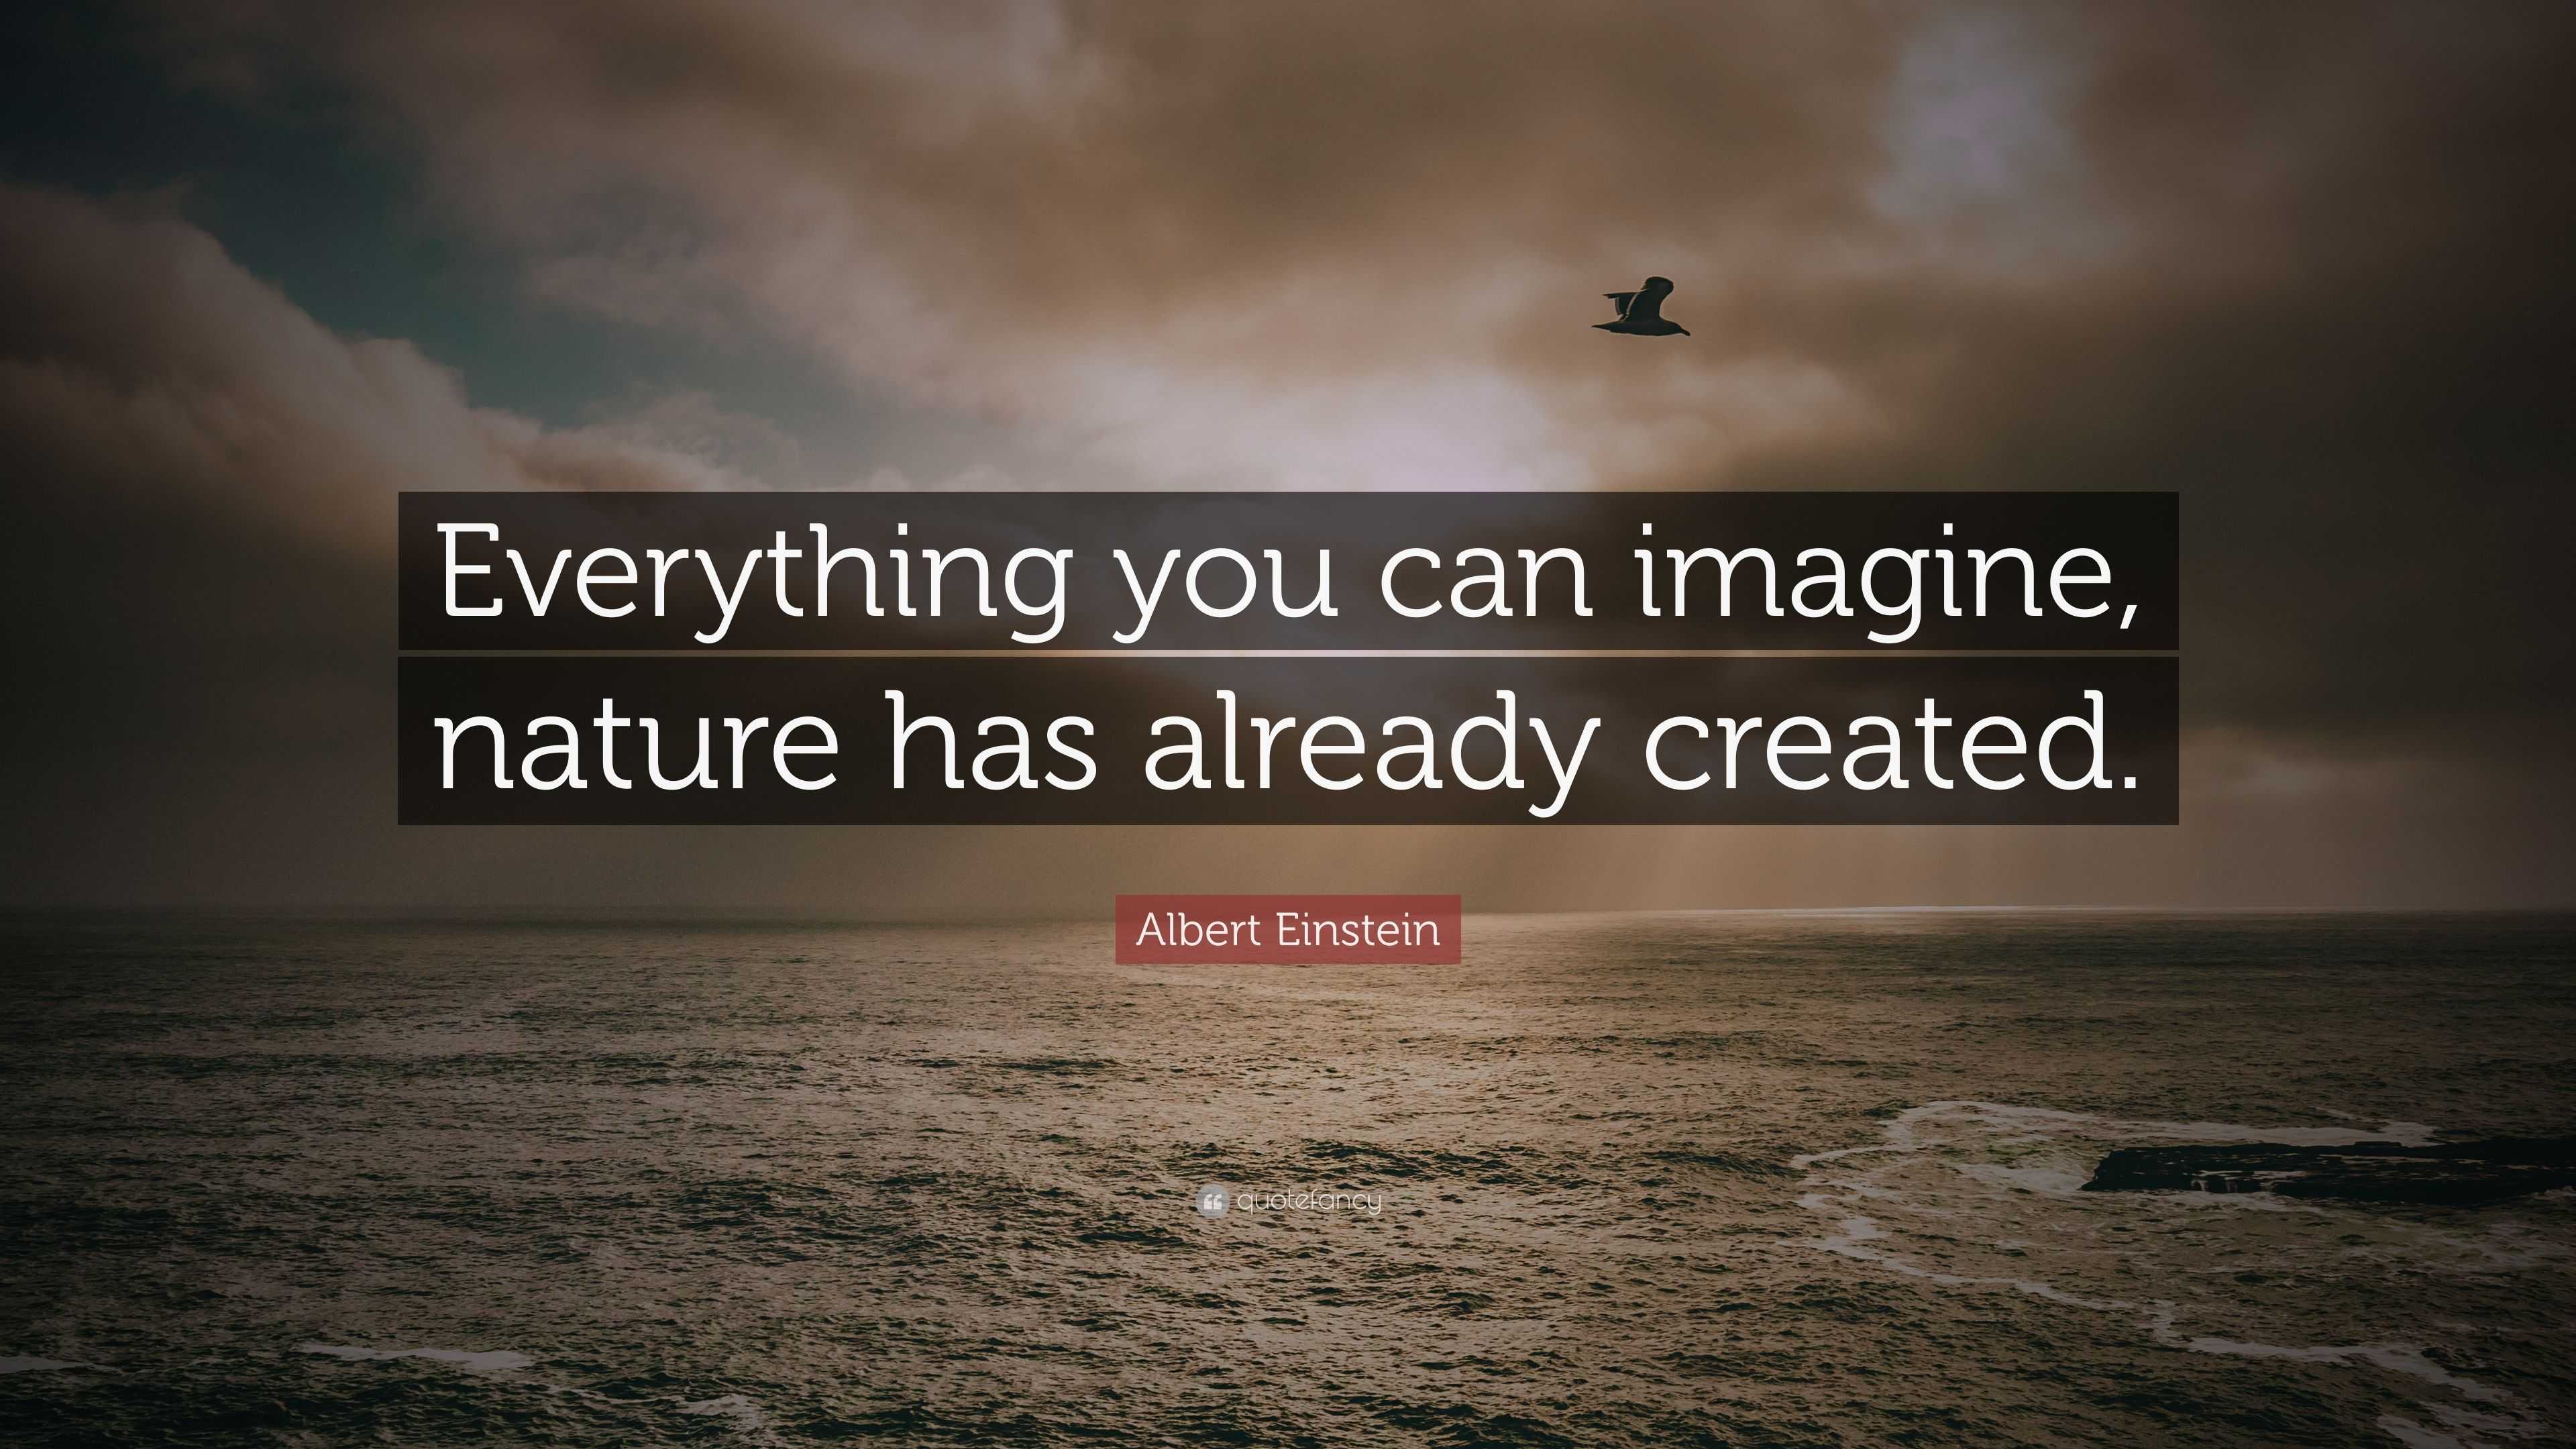 Albert Einstein Quote: “Everything you can imagine, nature has already  created.”